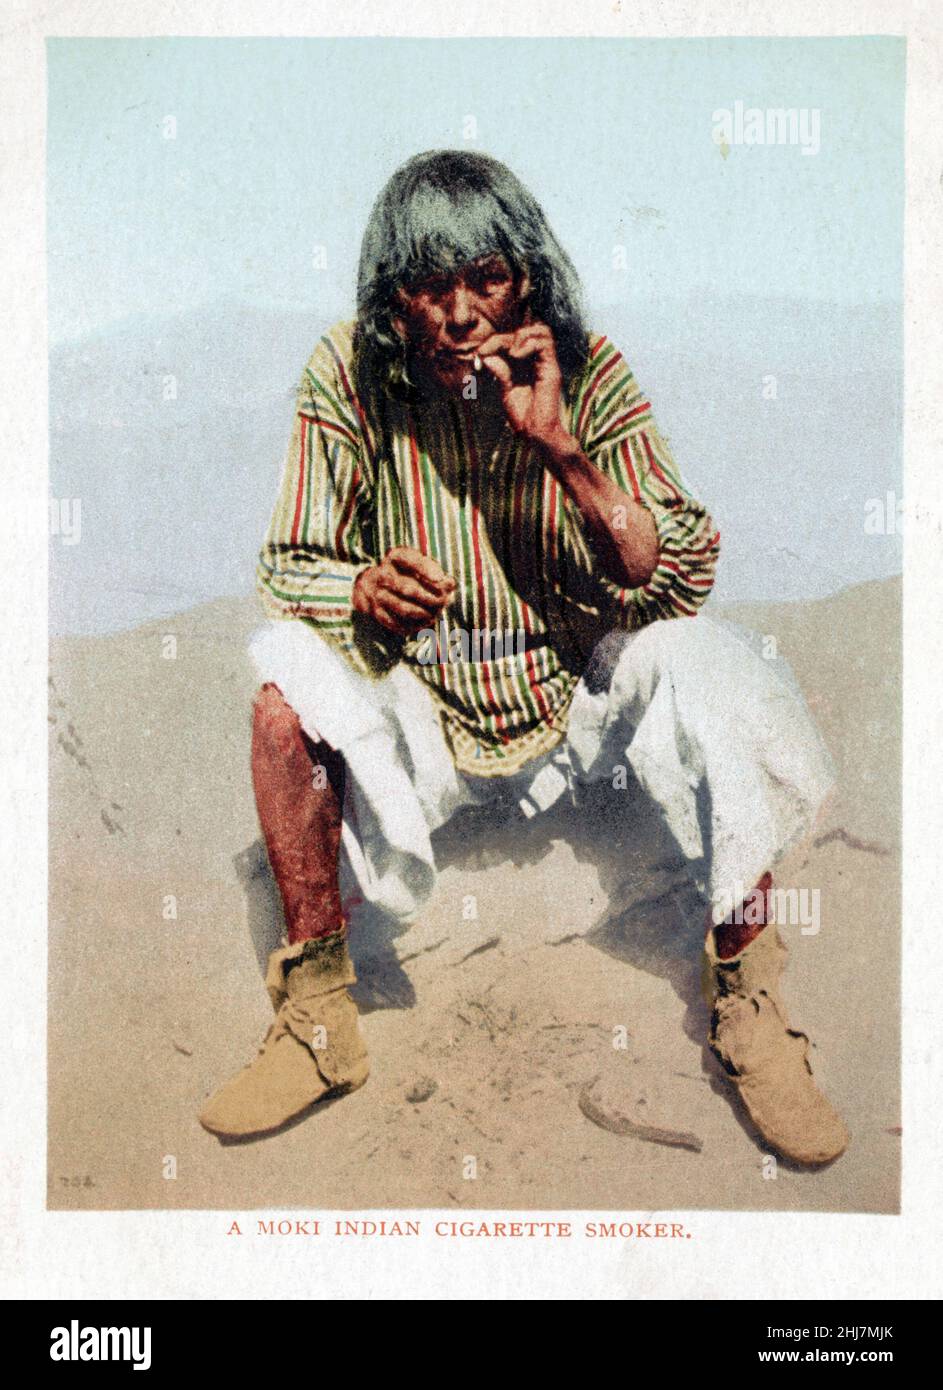 Antique and vintage photo - Native american / Indian / American Indian - A Moki Indian cigarette smoker. Detroit Photographic Co., 1899. Stock Photo